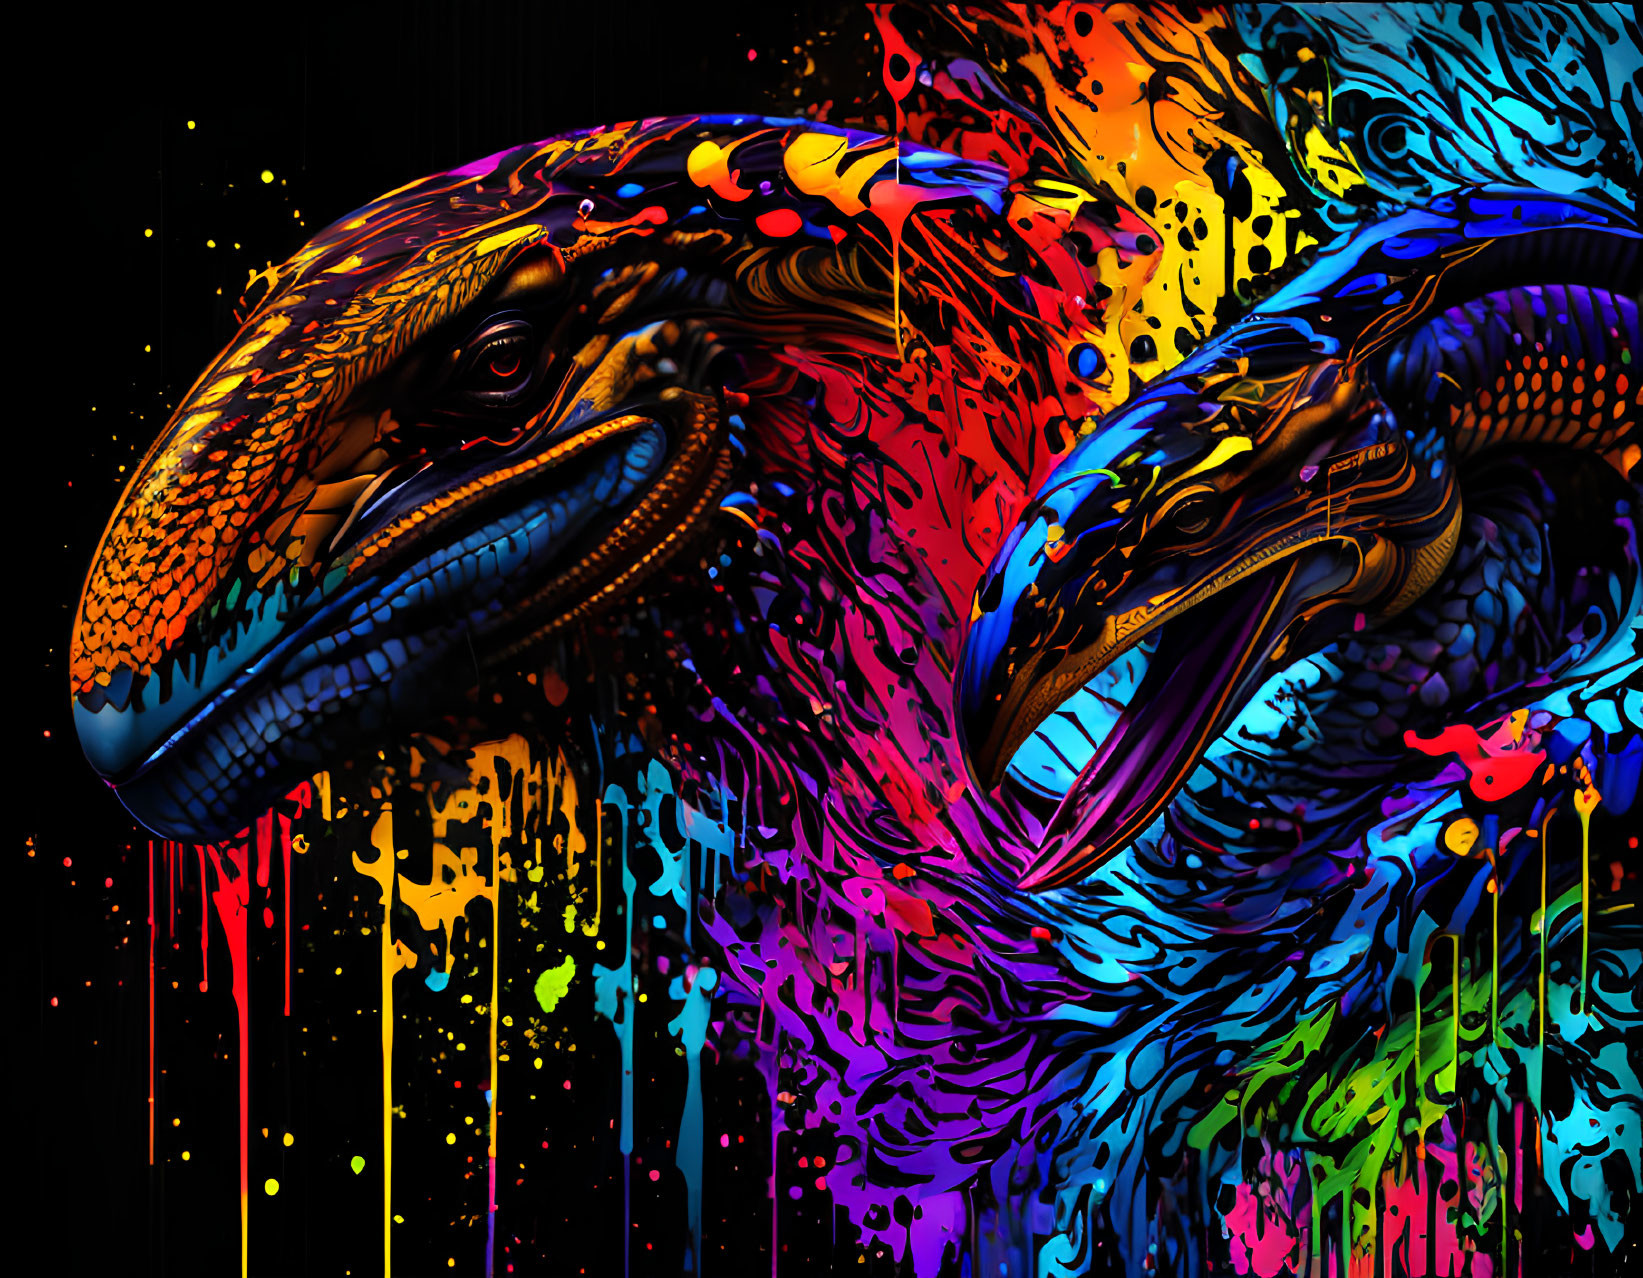 Colorful Velociraptors Artwork with Dripping Paint Textures